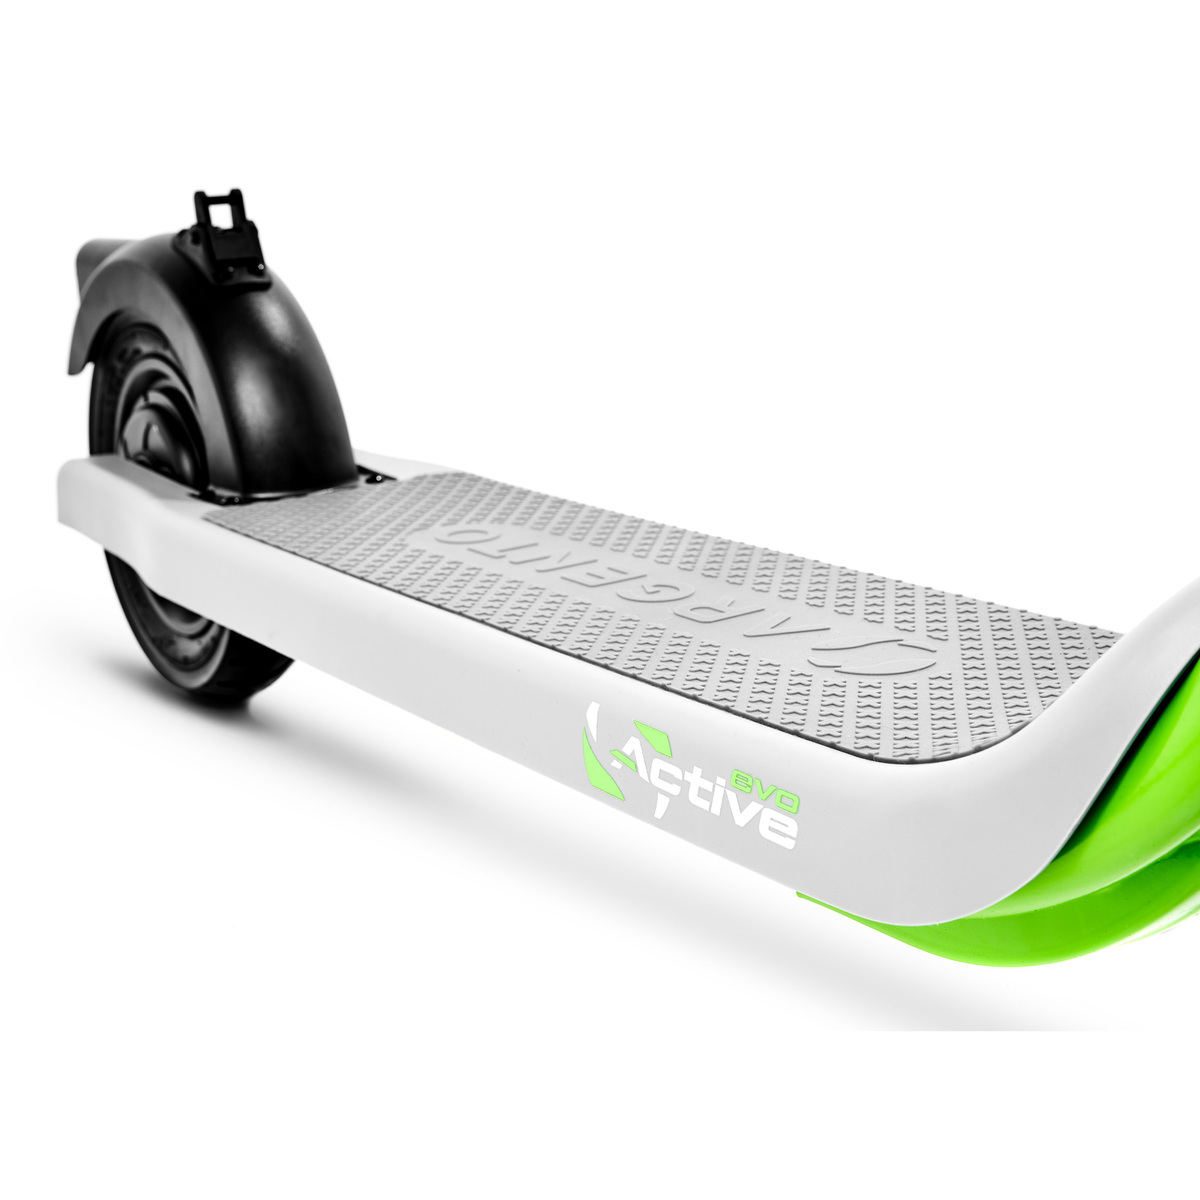 Argento Active EVO Safe Ride E-Scooter with Turn Signals, MT-ARG-ES-ACTIVE-EVO-WTS